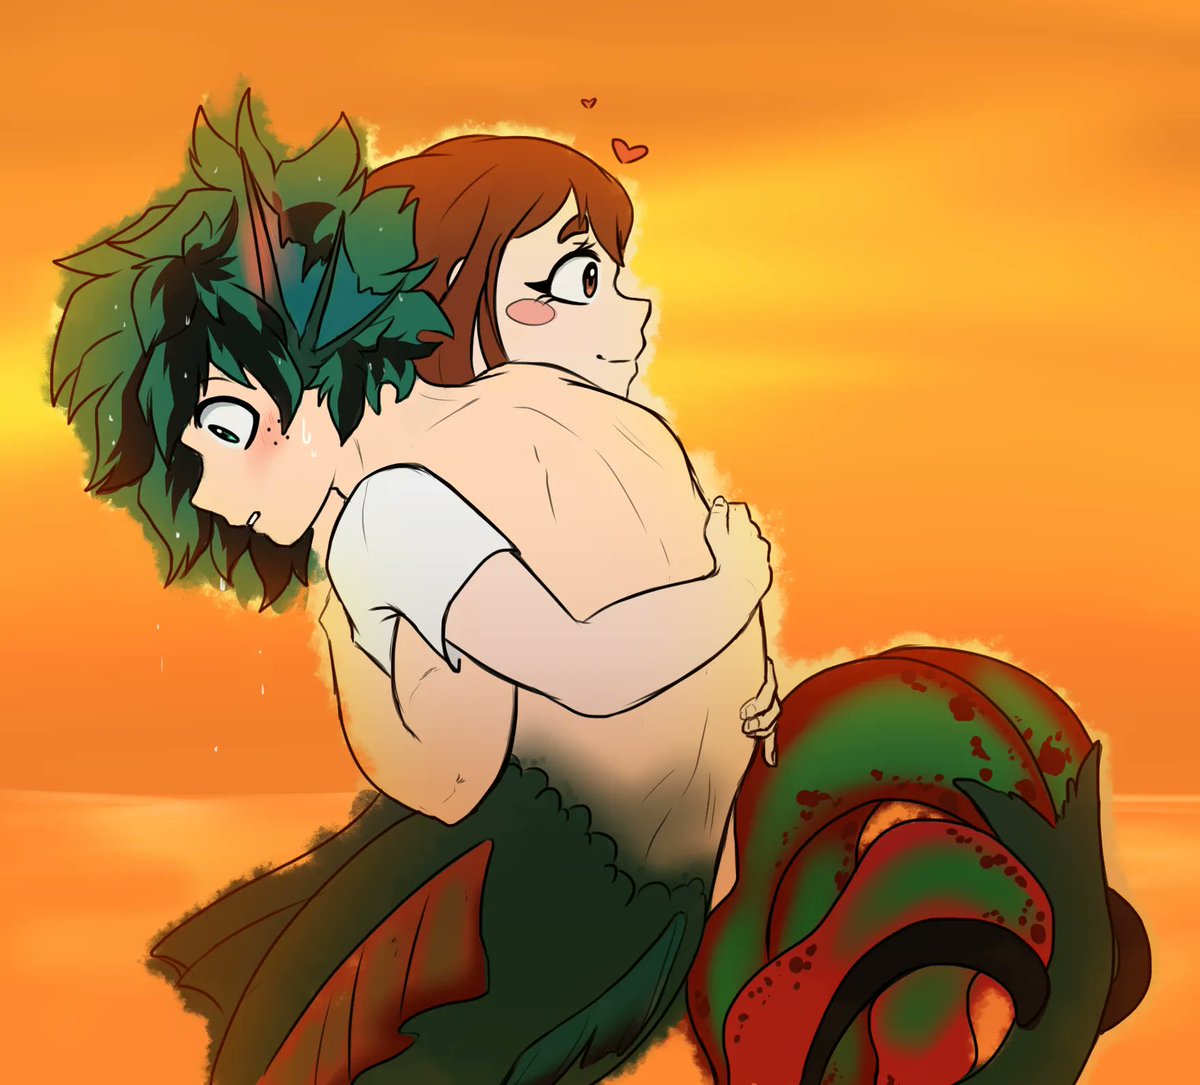 I did post this drawing here??? I don't remember it but if I did... well, here I am again!!

I really loved this one but I also want to redraw them soon or later... 

#Izuocha #dekucha #mha #izuku #ochako #mermaid